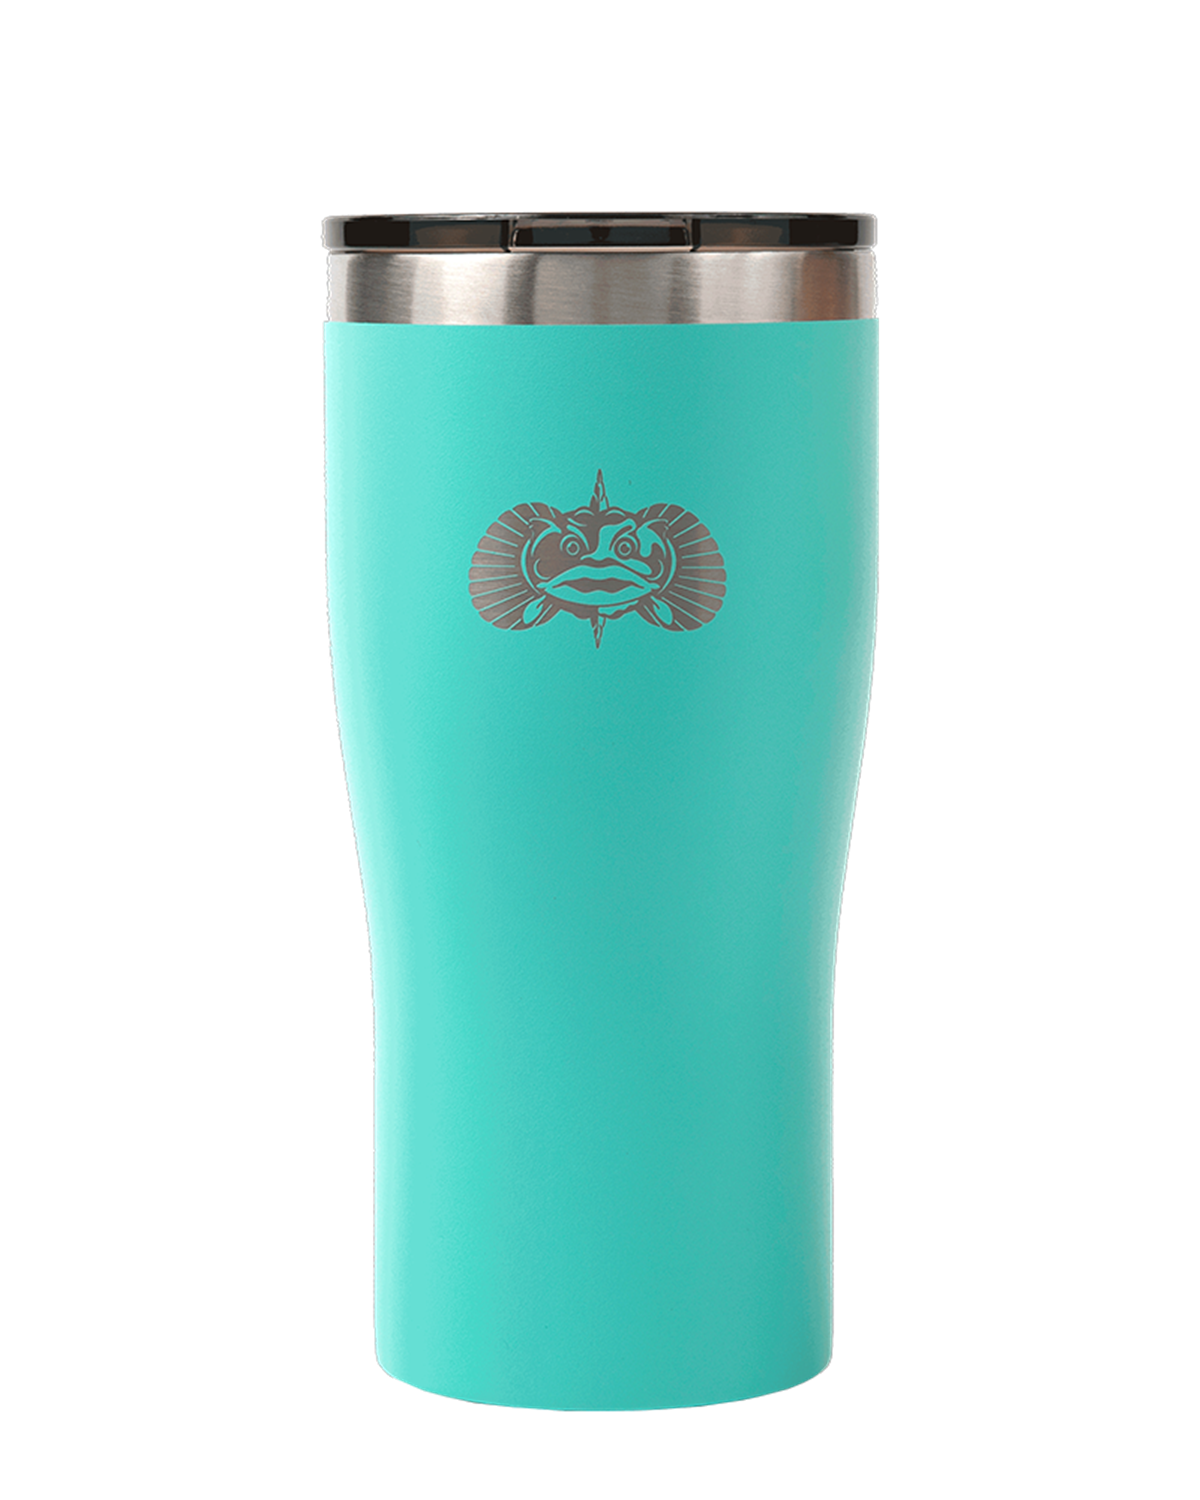 TOADFISH Toadfish Non-Tipping Insulated 20oz Coffee Tumbler